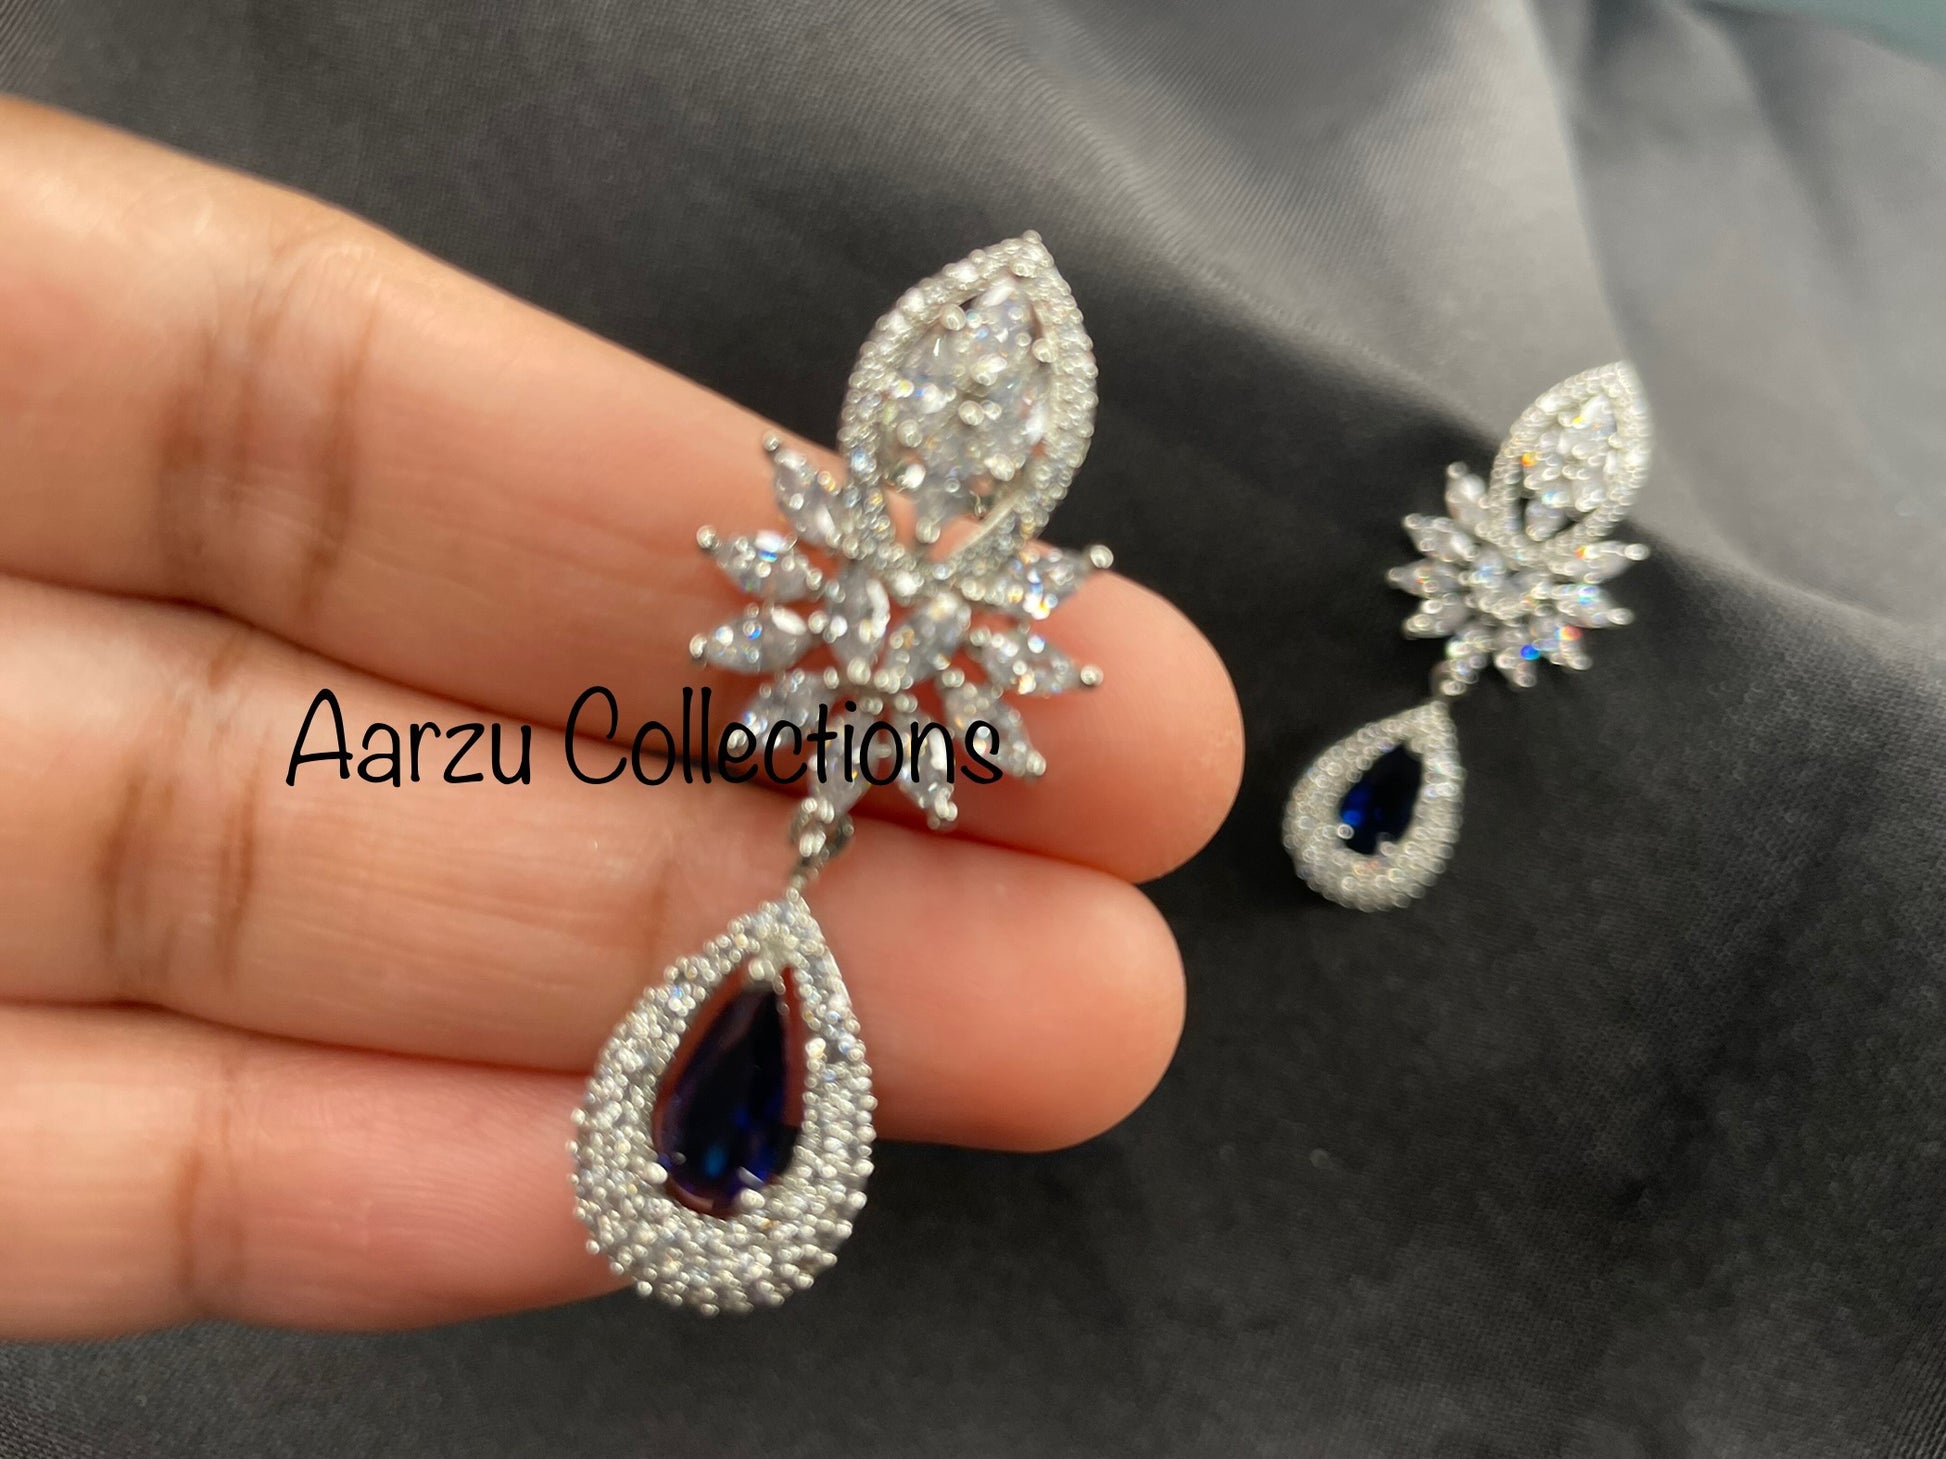 Buy Putstyle Silver American Diamond Earrings Jewellery For Women Available  Online at ScrollnShops